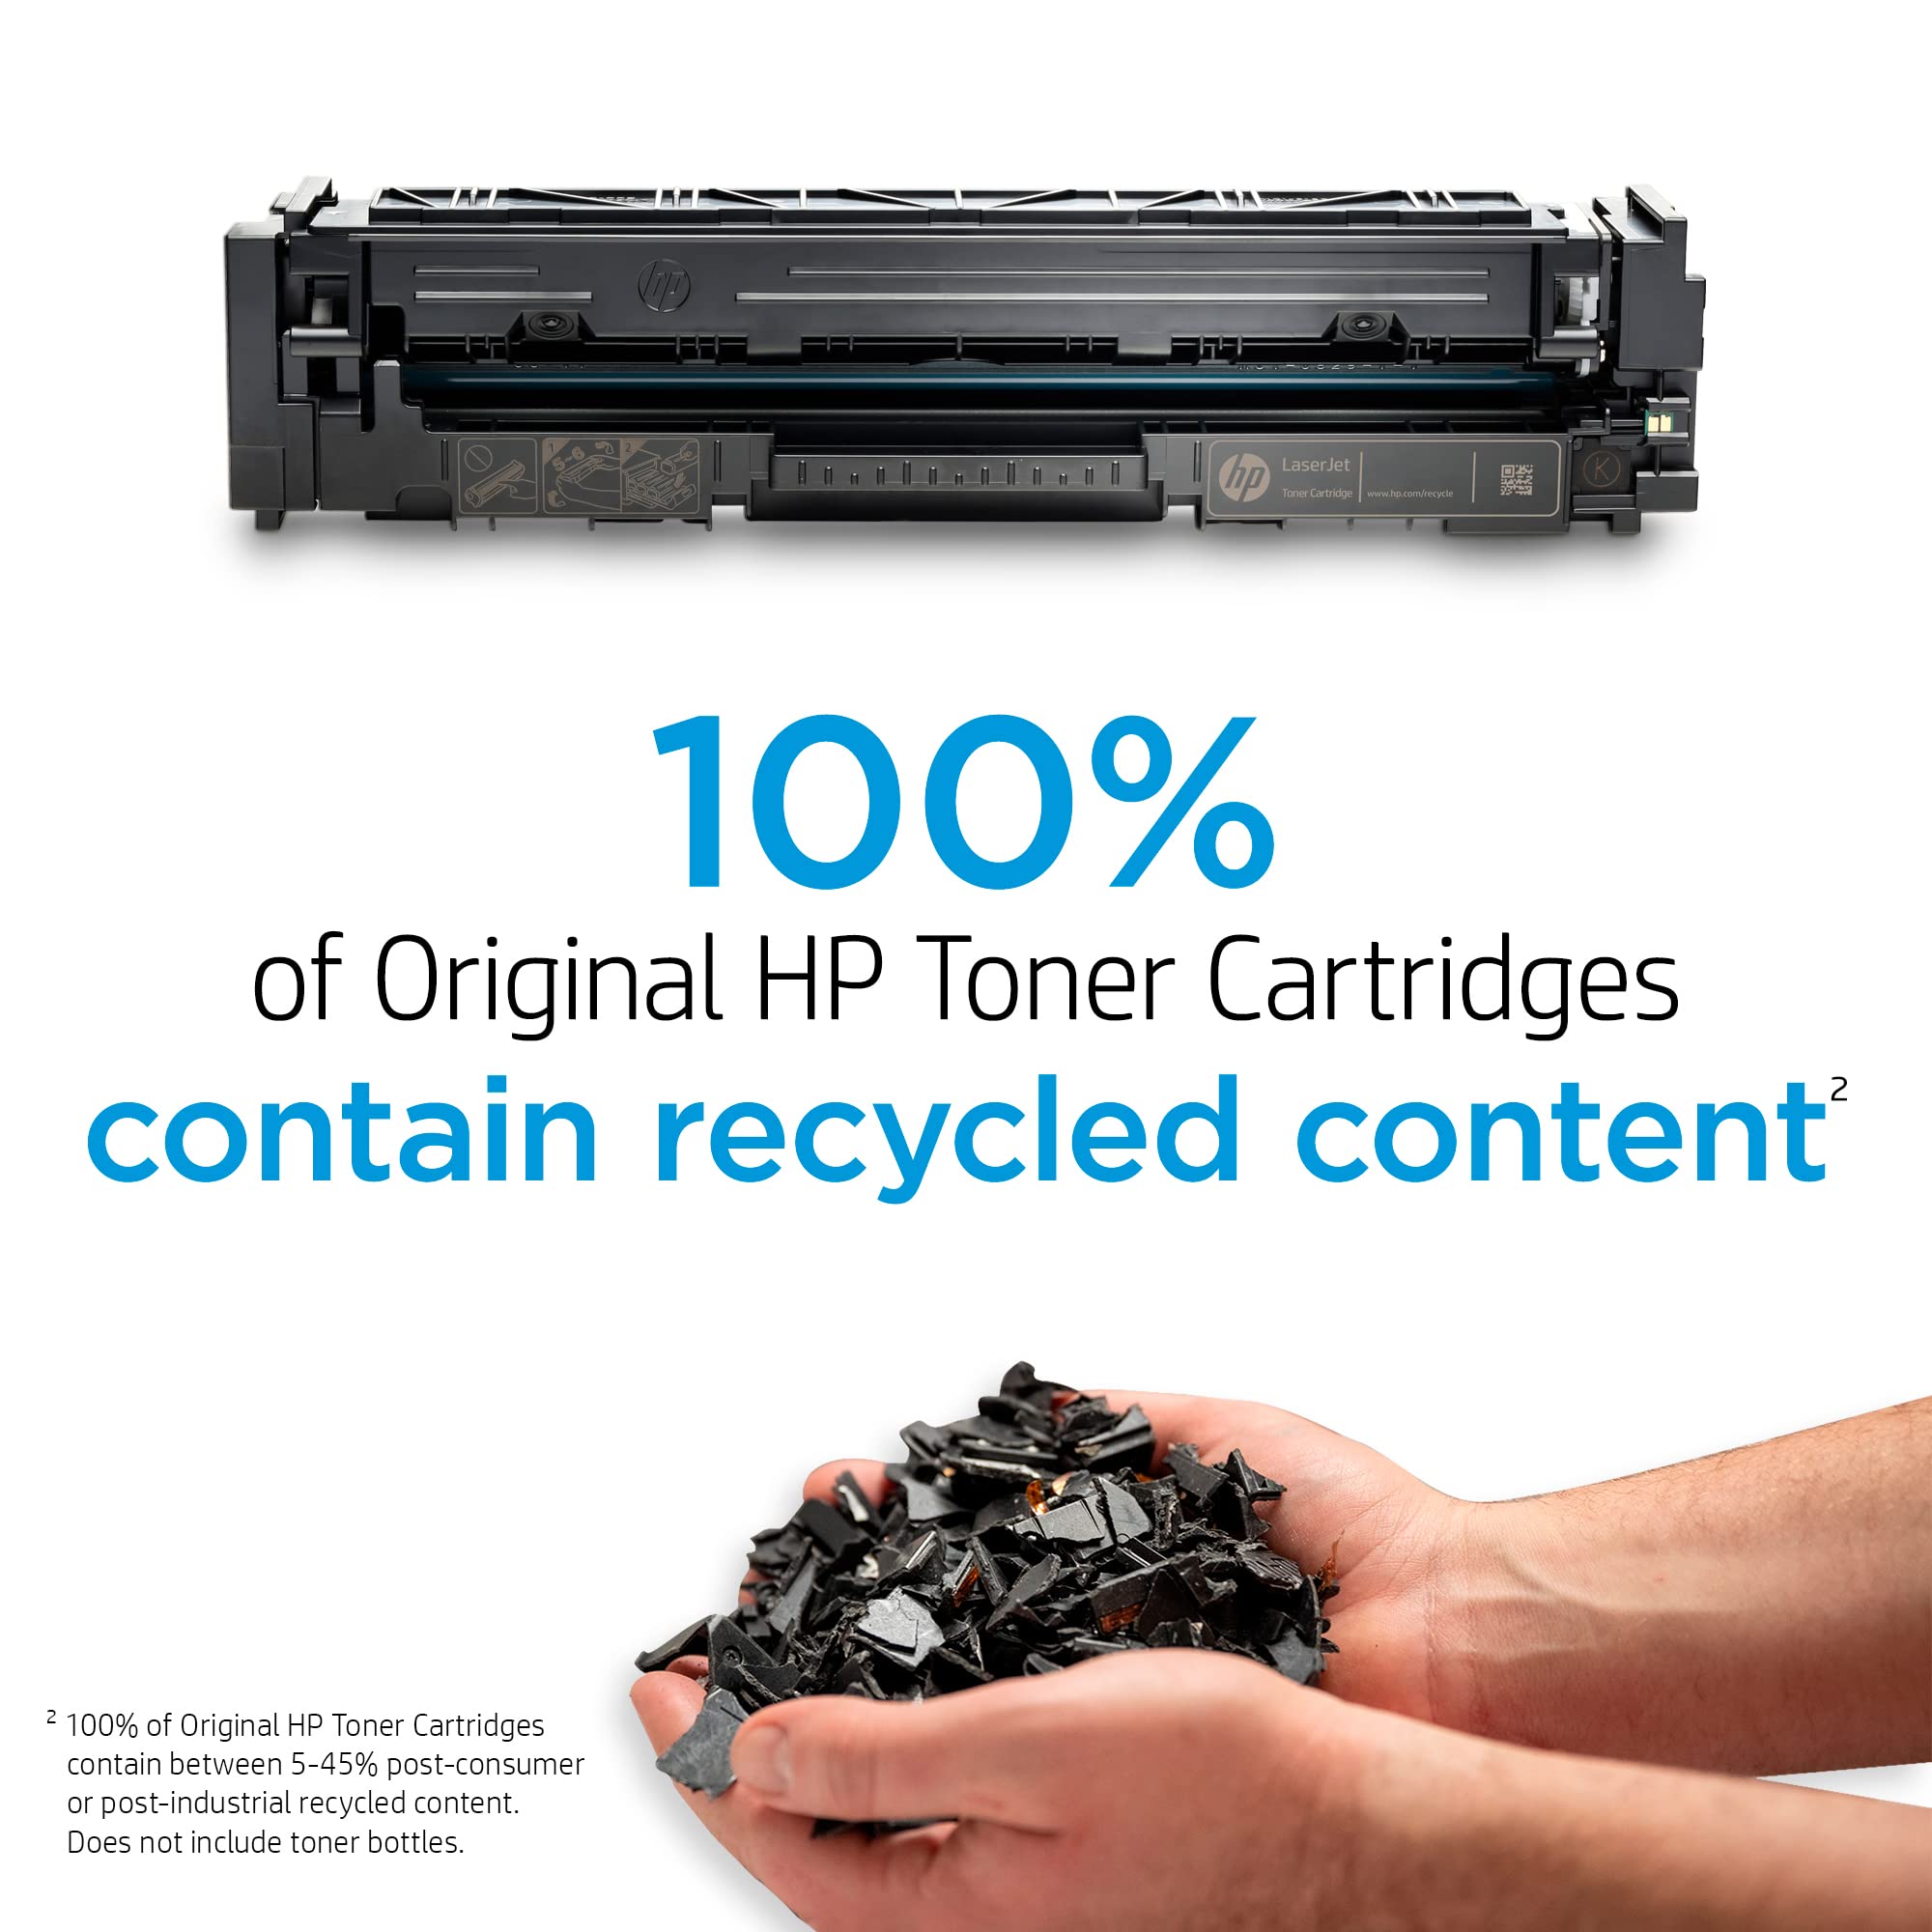 HP 58A Black Toner Cartridge | Works with HP LaserJet Enterprise M406 Series, HP LaserJet Enterprise MFP M430 Series, HP LaserJet Pro M404 Series, HP LaserJet Pro MFP M428 Series | CF258A